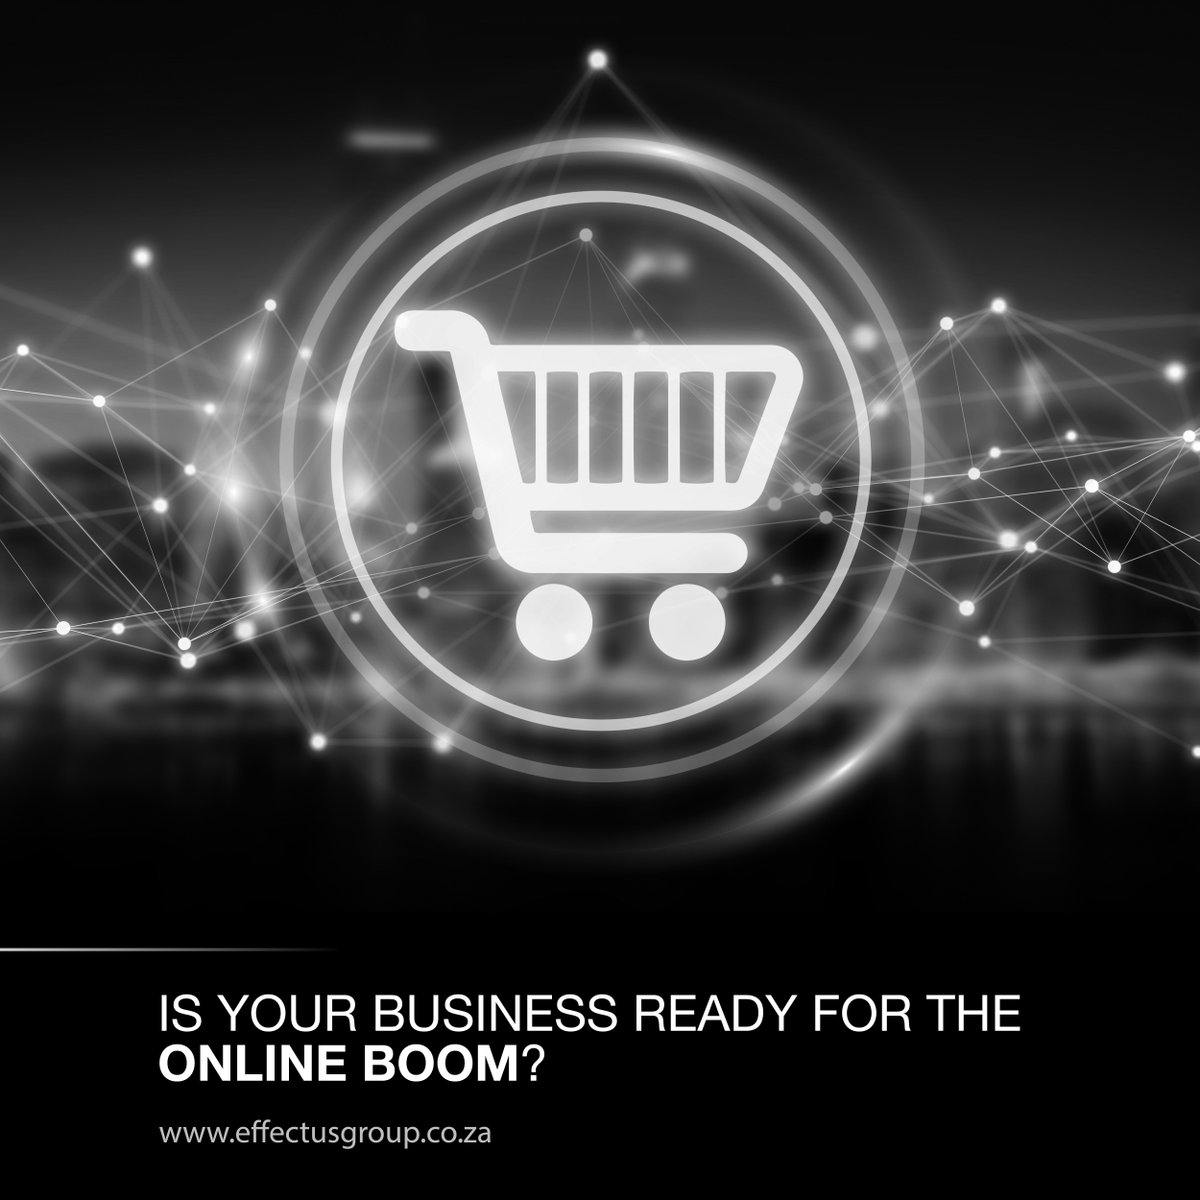 Did you know? Global e-commerce is expected to reach $5.4 trillion by 2025! 

Is your business ready for the online boom? 

Get in touch with #EffectusGroup for expert digital marketing strategies. 

#MarketingSupport